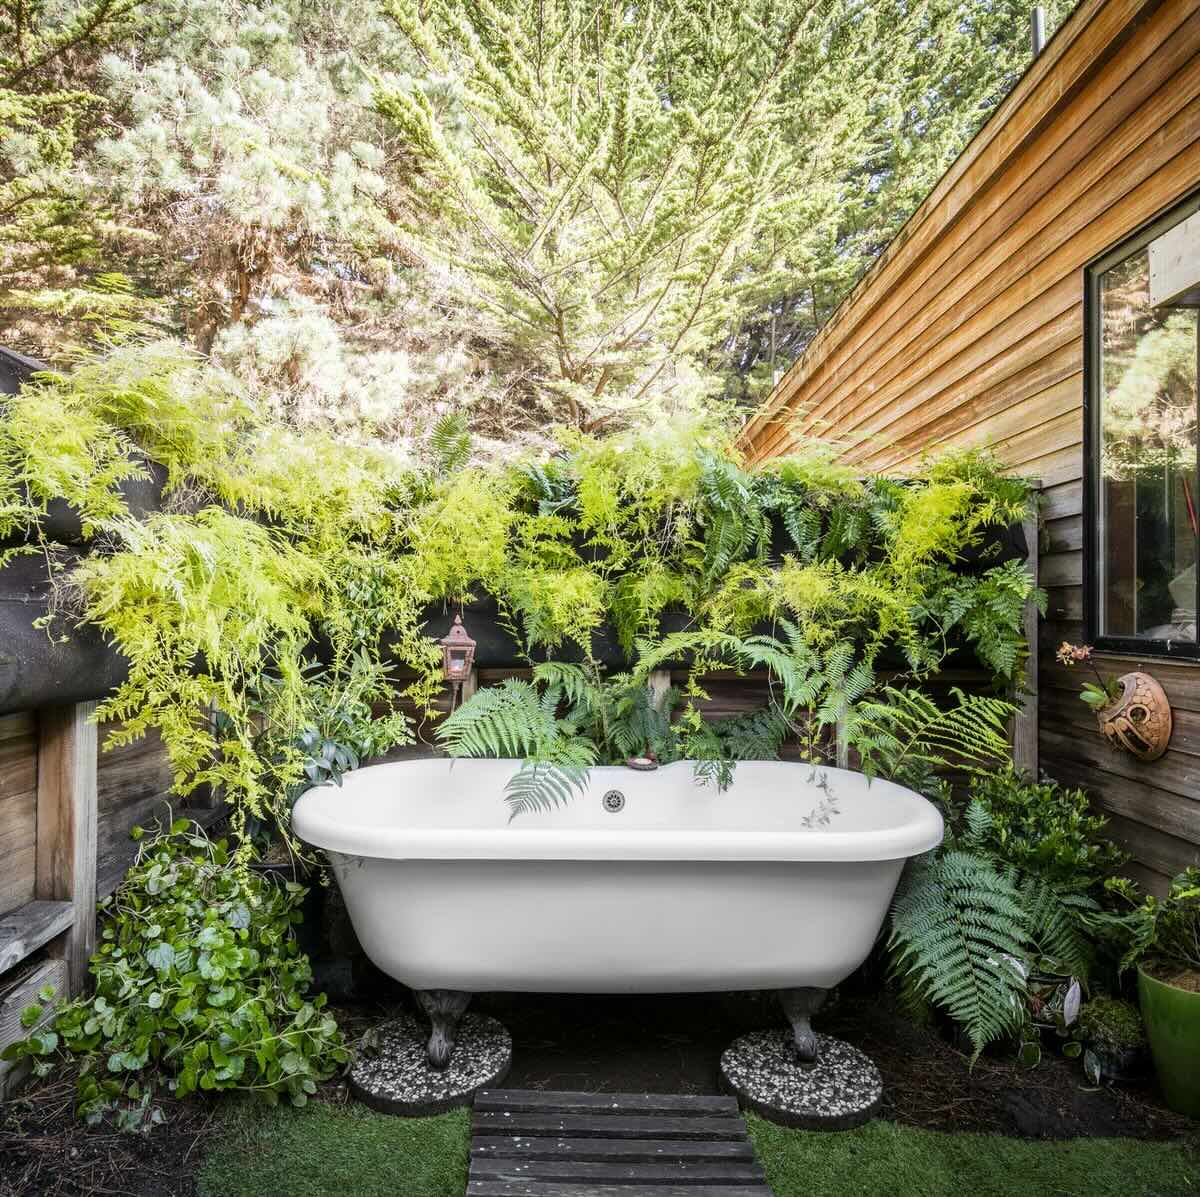 How To Make An Outdoor Bathtub